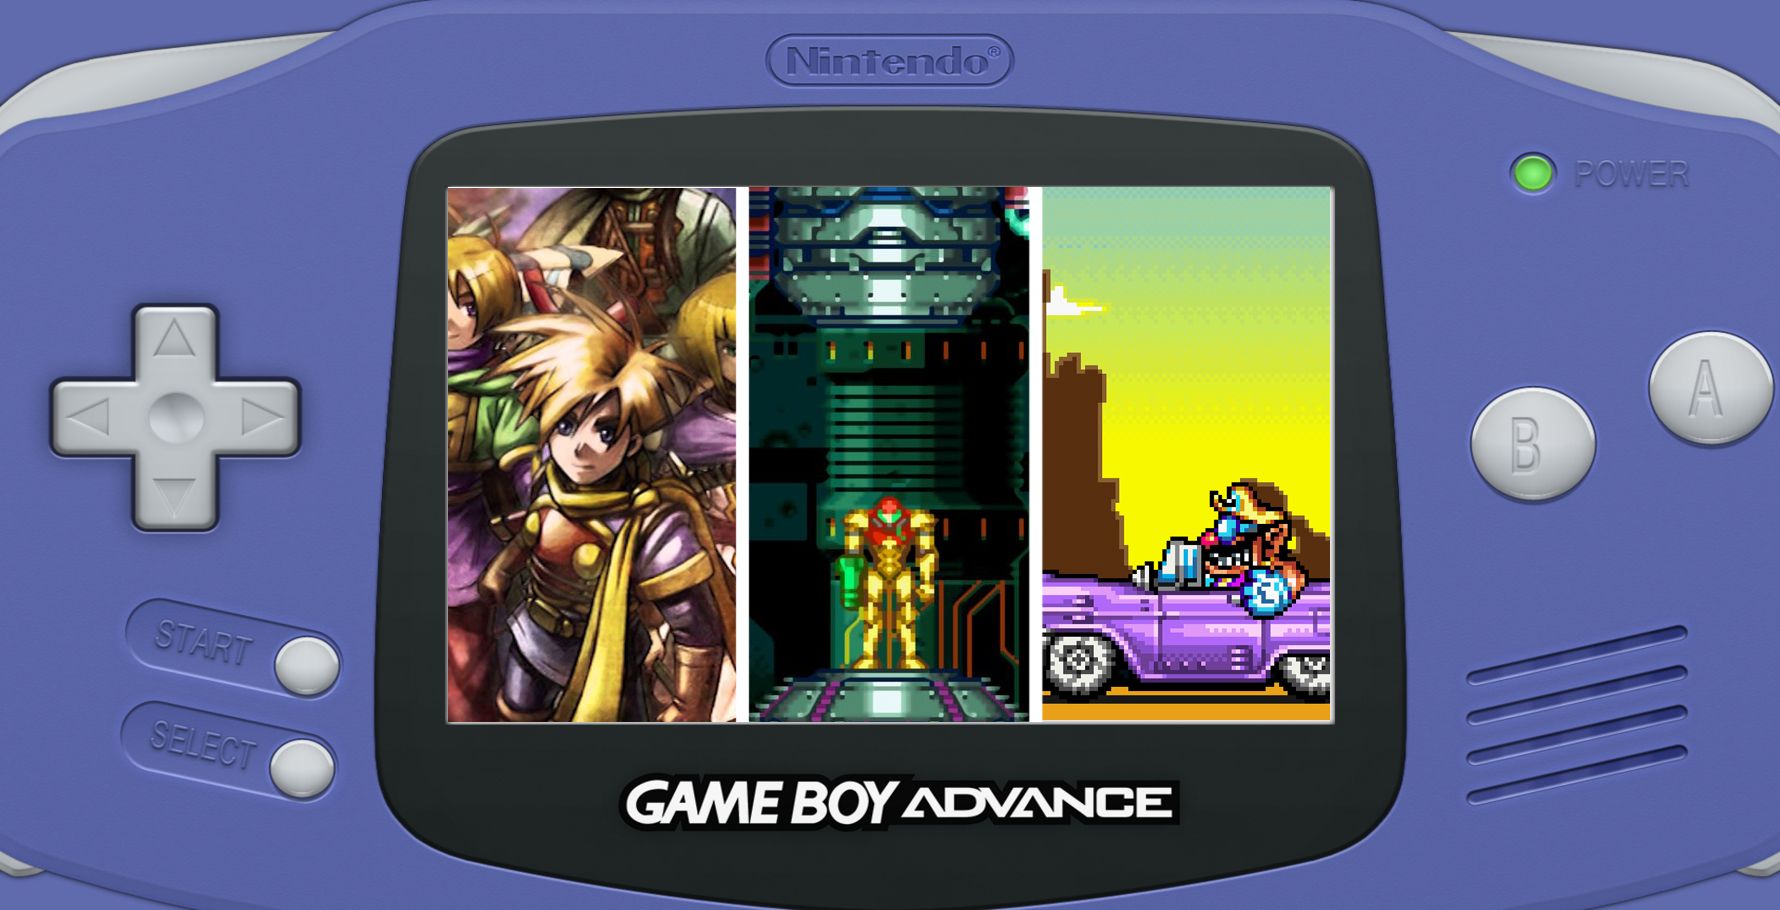 All-Time Best Boy Advance Ranked